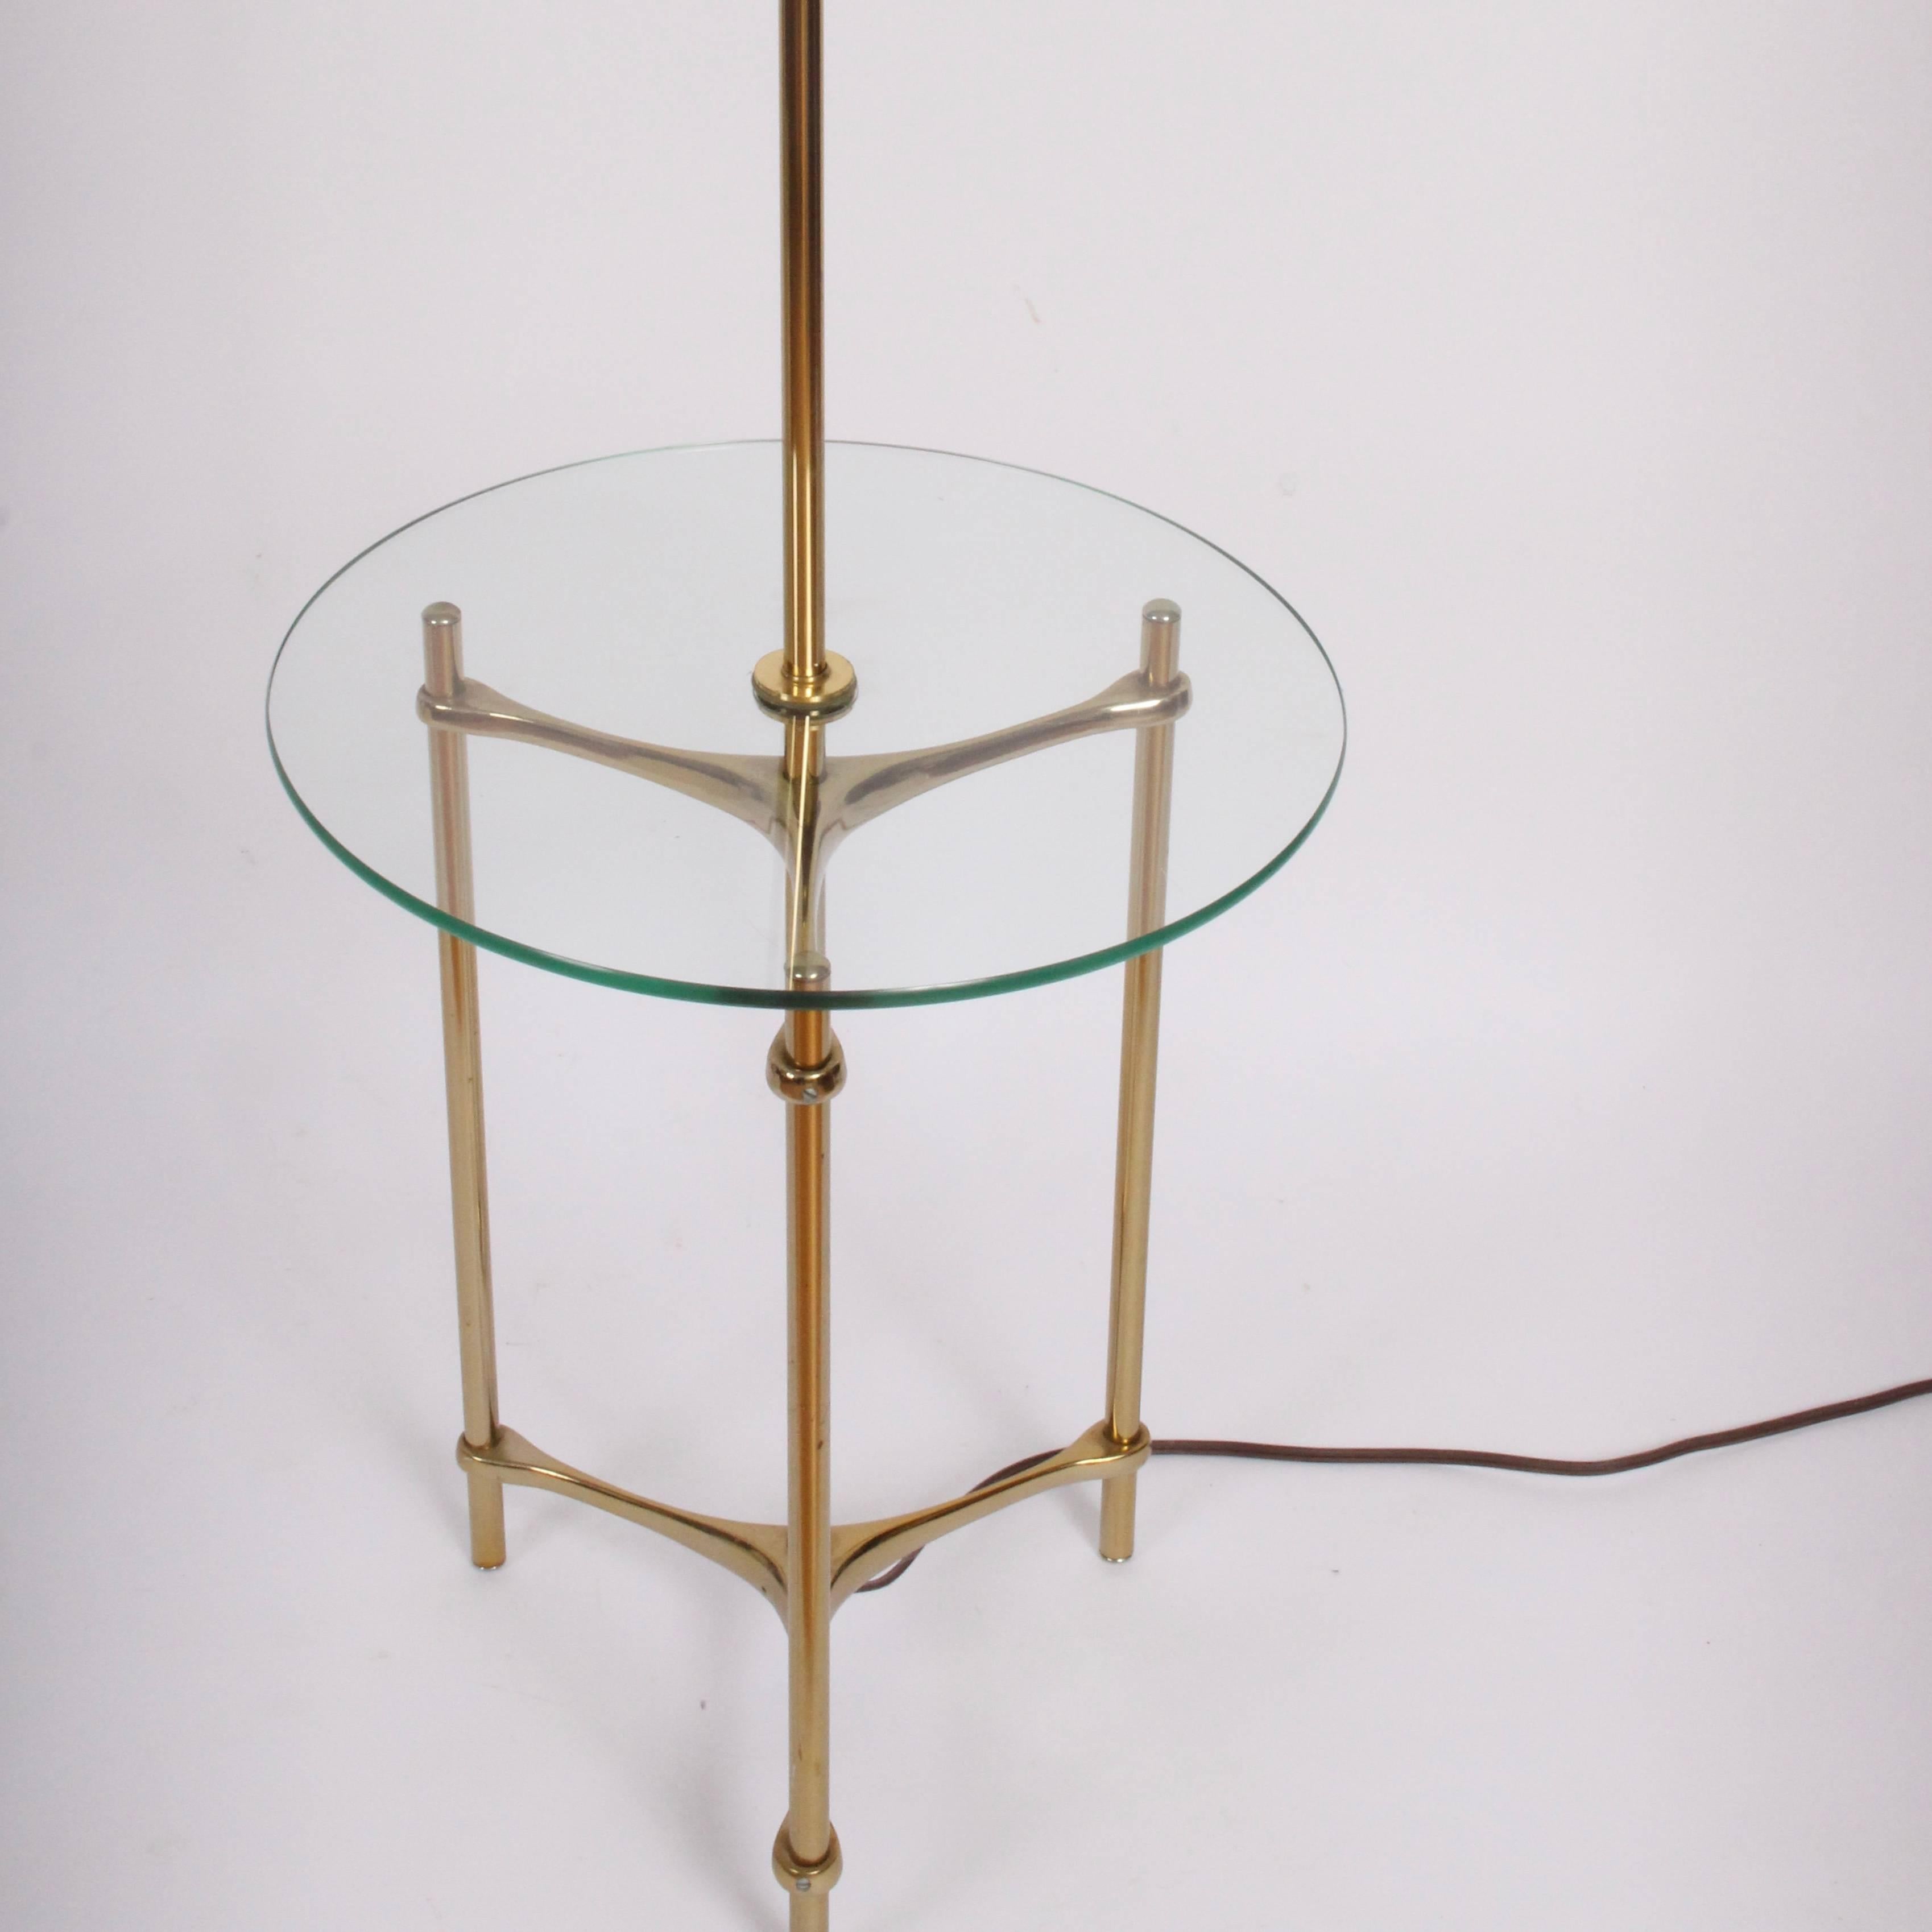 Classic 1970s Laurel Lamp Mfg. Co. Lamp Table in Brass and Glass. The Duo Reading Lamp Side Table features a tubular Brass stem, 
three legged tripod base and round 16 D Glass table surface. Sturdy. Versatile. Lampshade (12 H x bottom 16 D x top 10